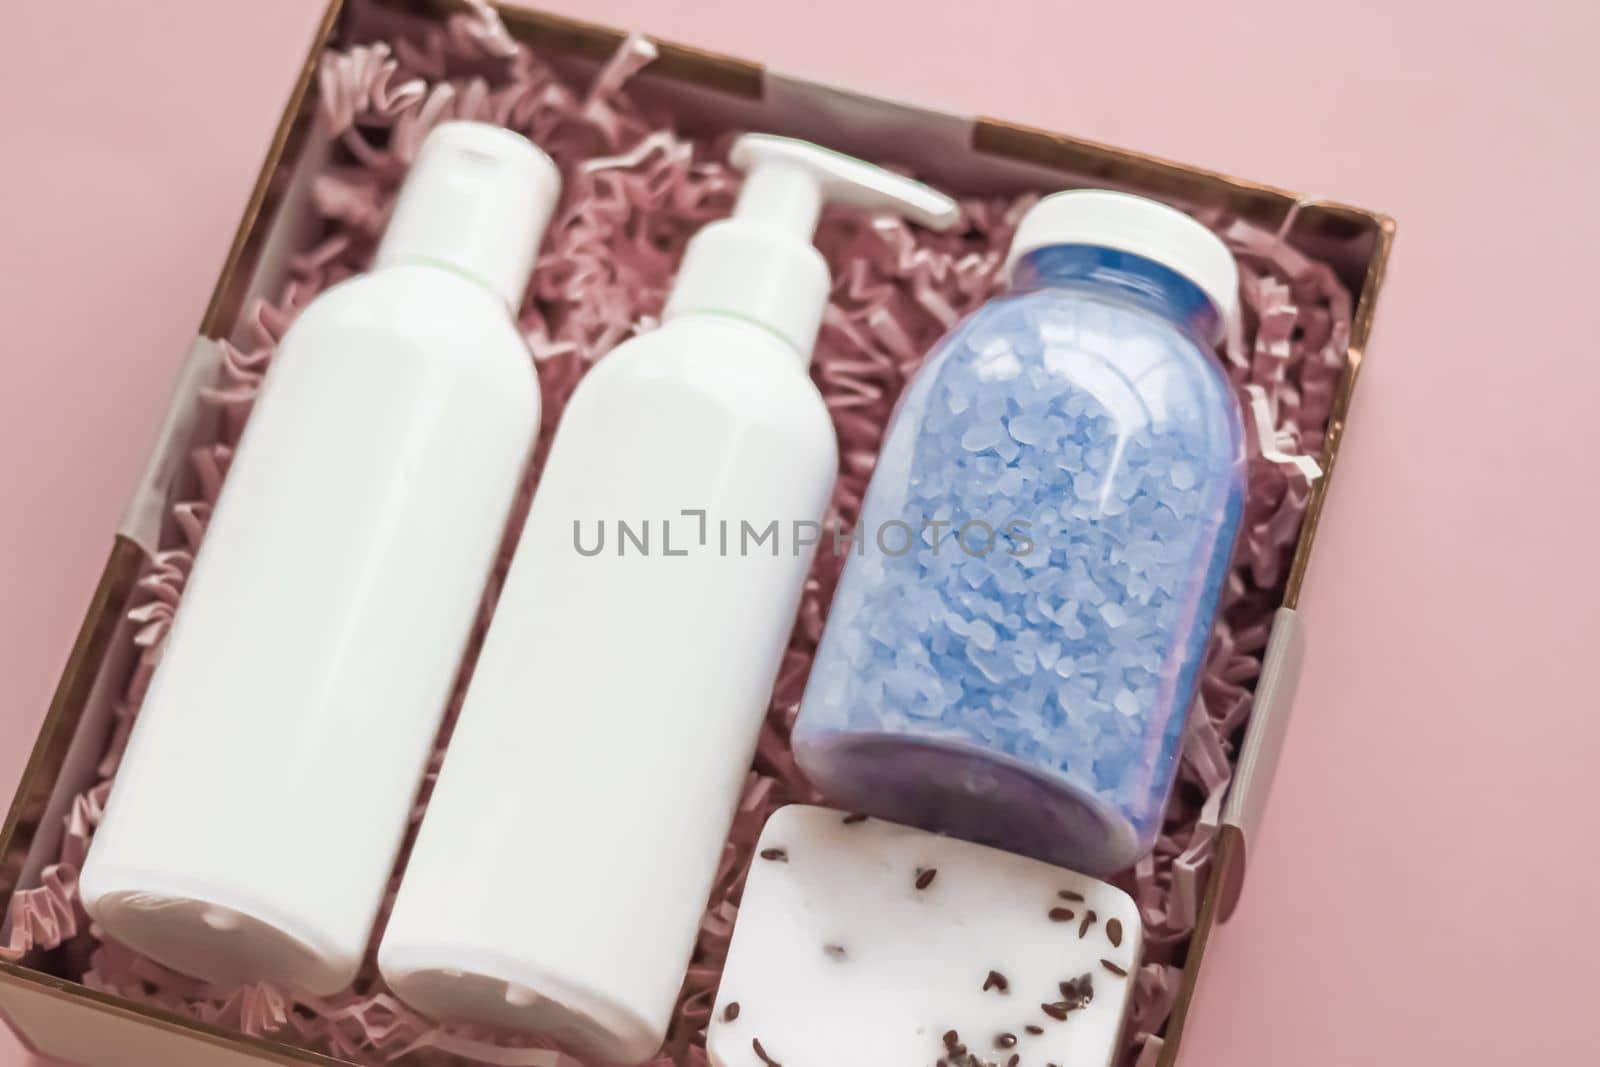 Beauty box subscription package, luxury skincare and body care products, milk lotion, bath salt, soap, shower gel as flat lay, spa cosmetics as holiday gift, online shopping delivery, flatlay.